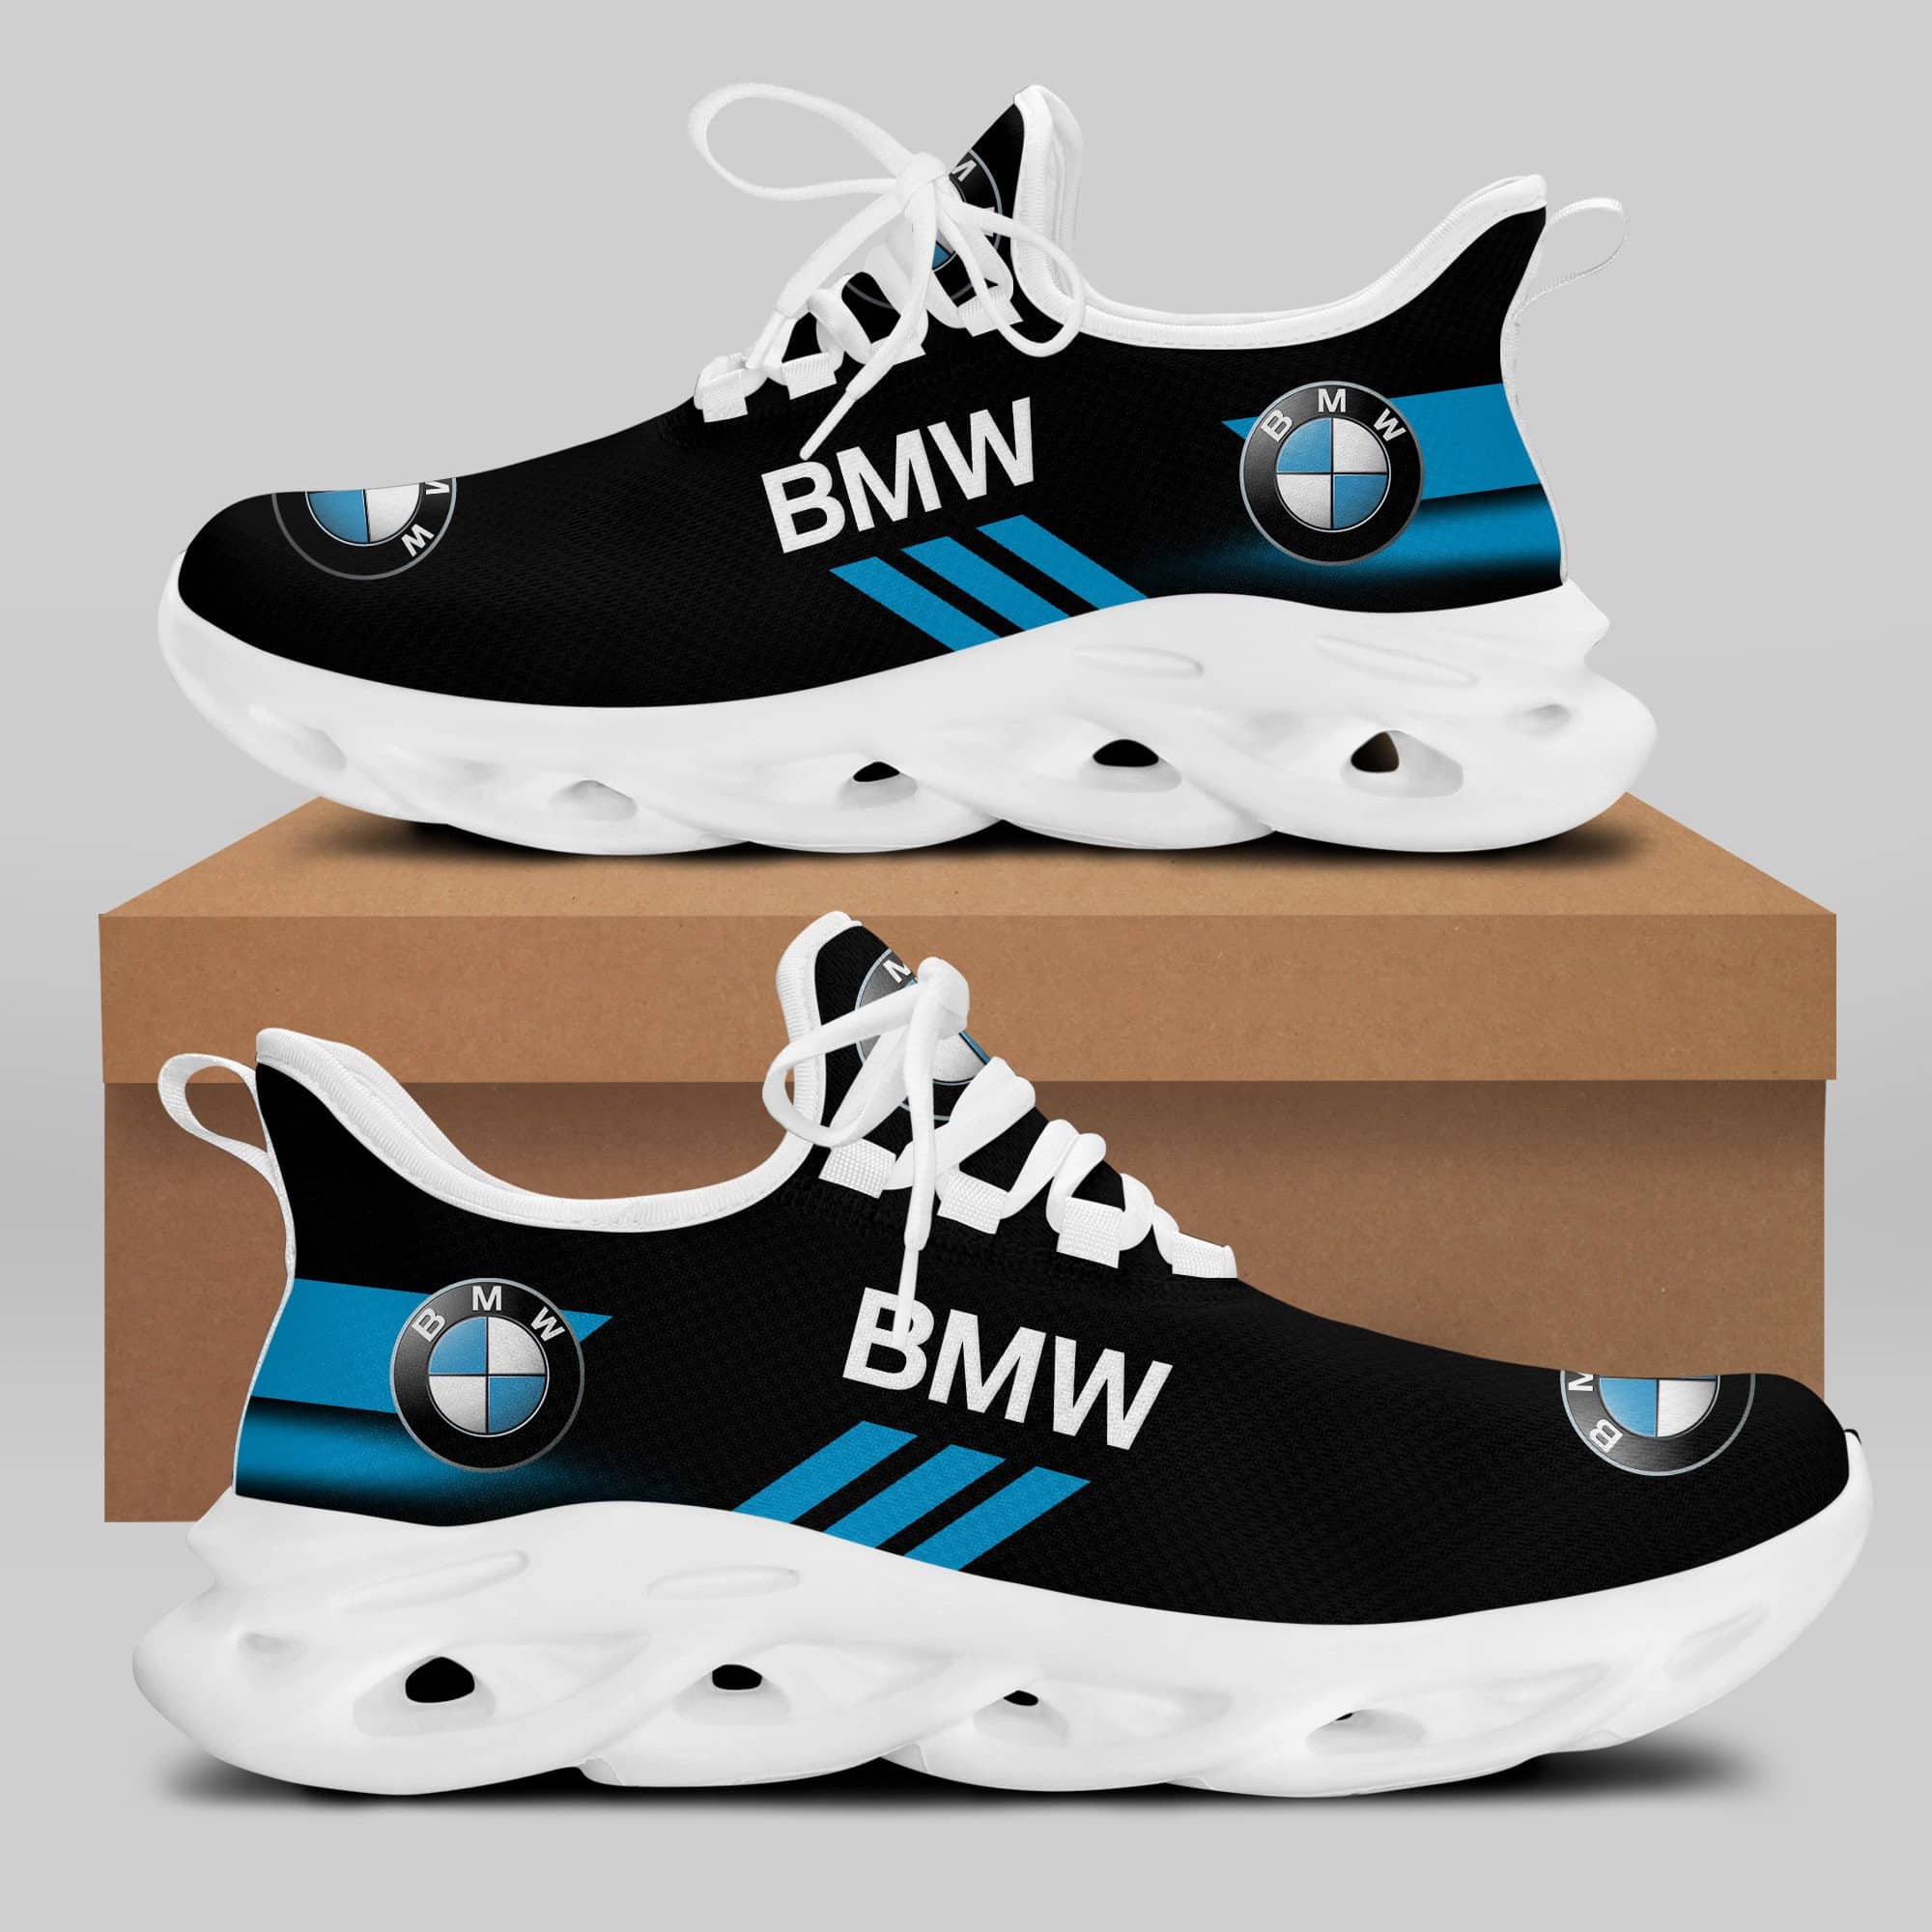 Bmw Running Shoes Max Soul Shoes Sneakers Ver 8 2